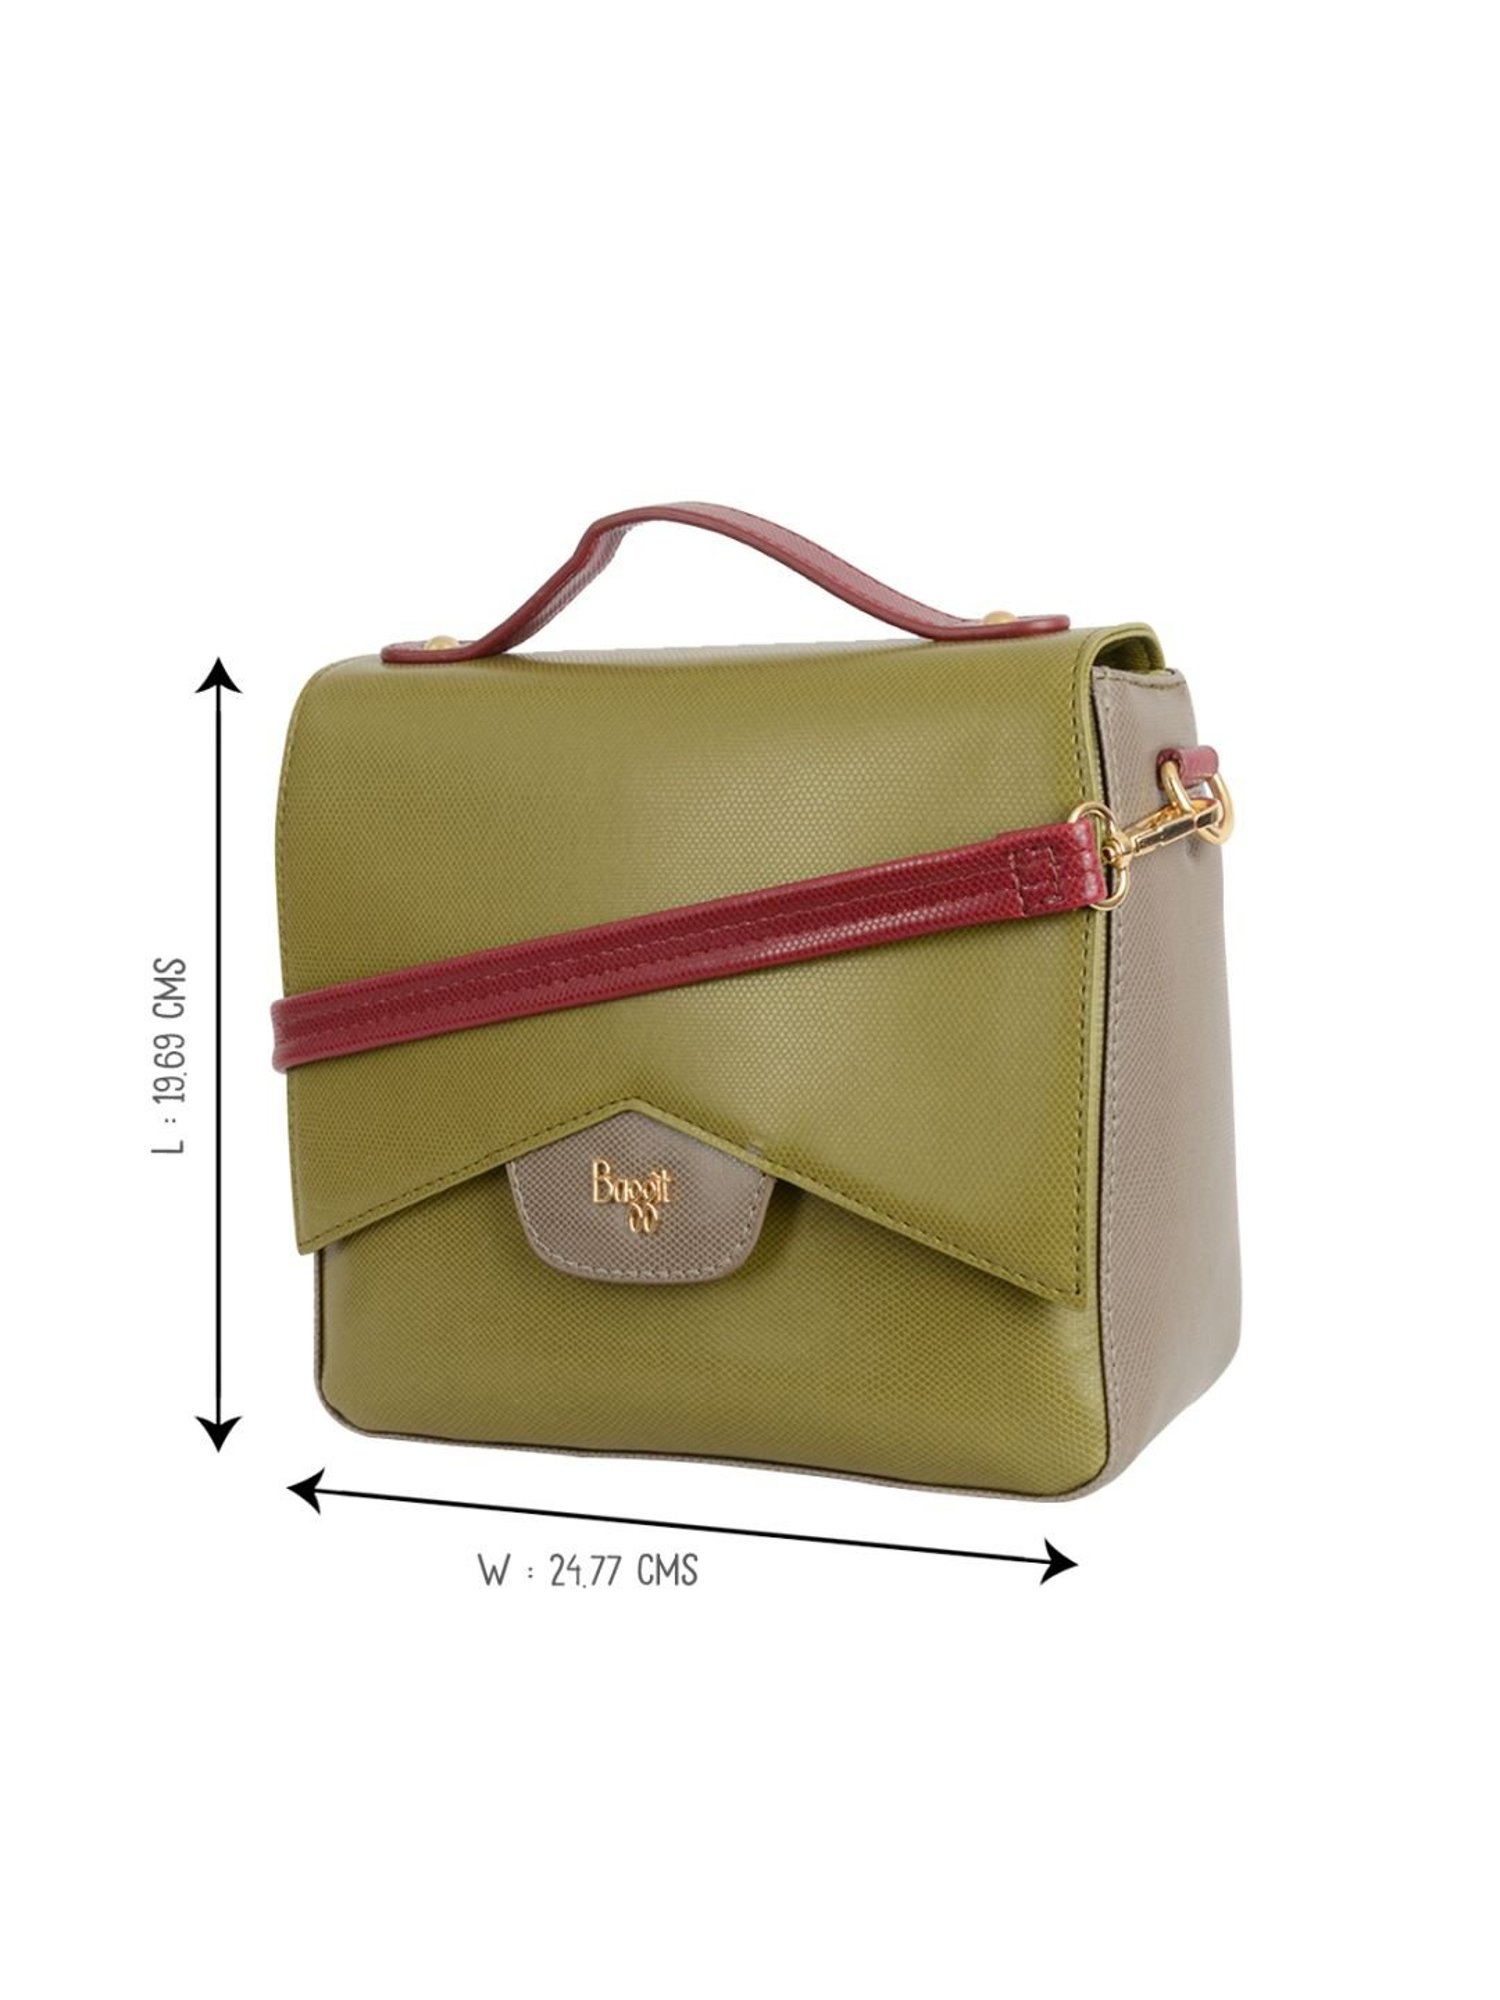 15 Latest Models of Baggit Handbags for Womens in India